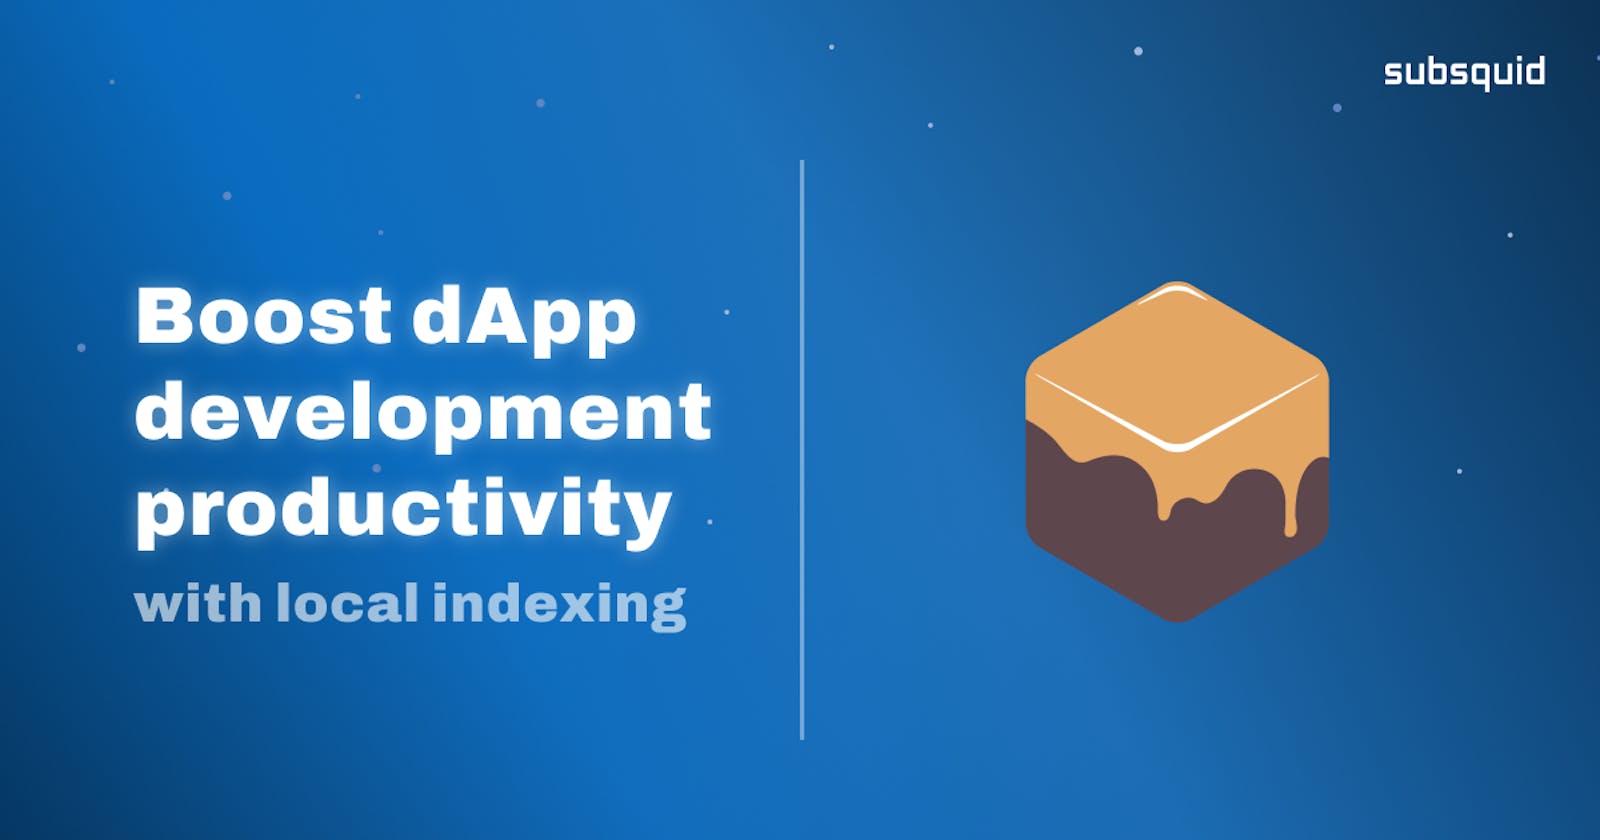 Boost your dApp development productivity with local indexing